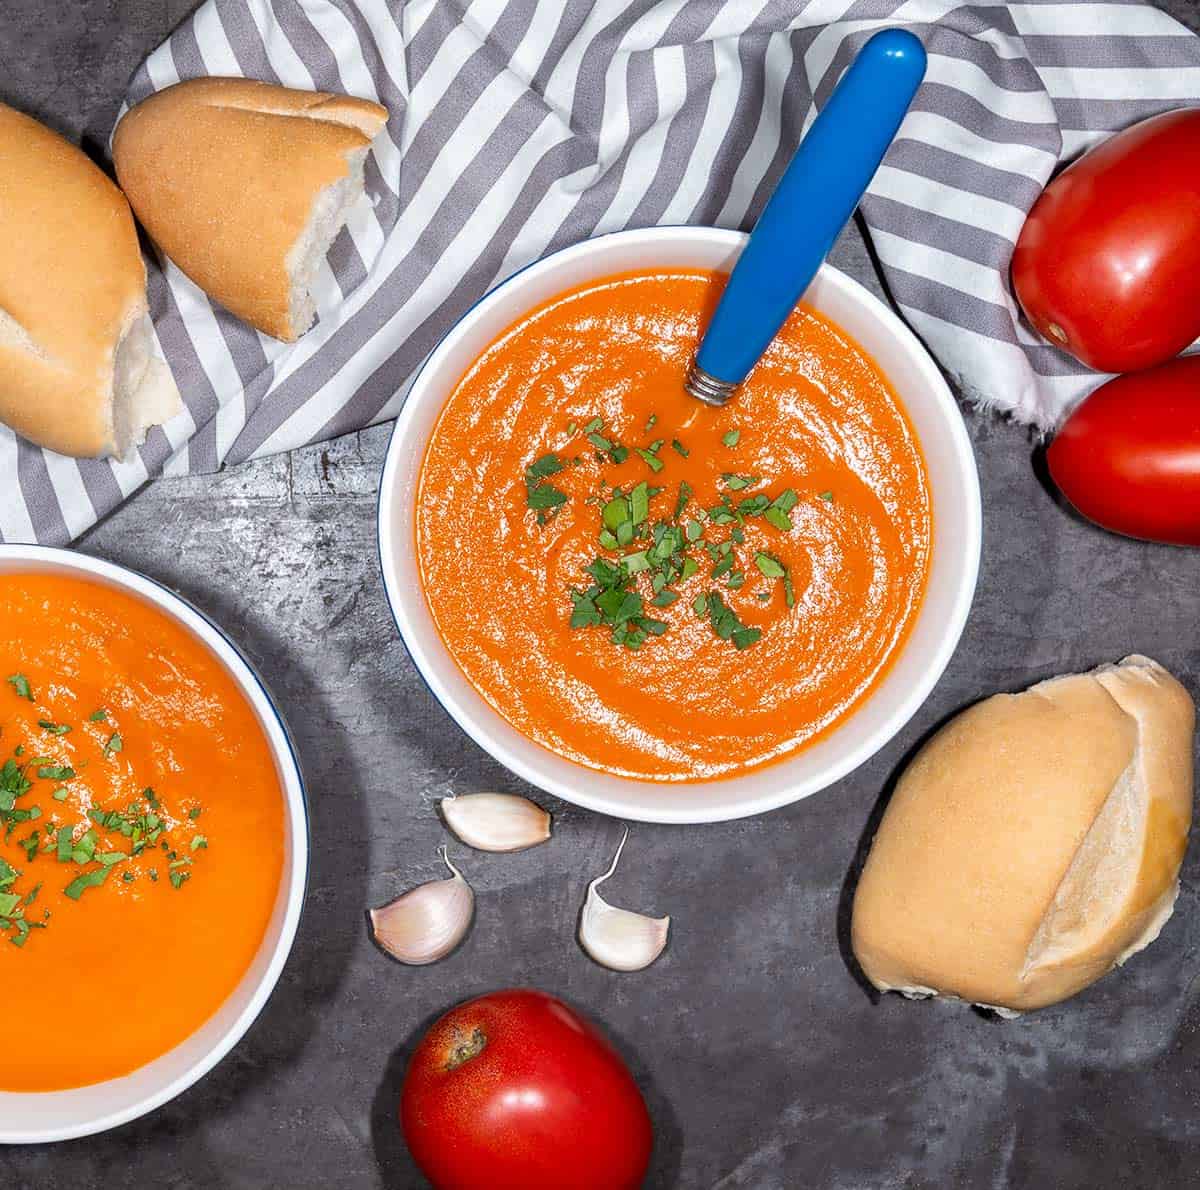 Overhead view of two bowls of vegan tomato soup with bread, garlic, and roma tomatoes in the background.